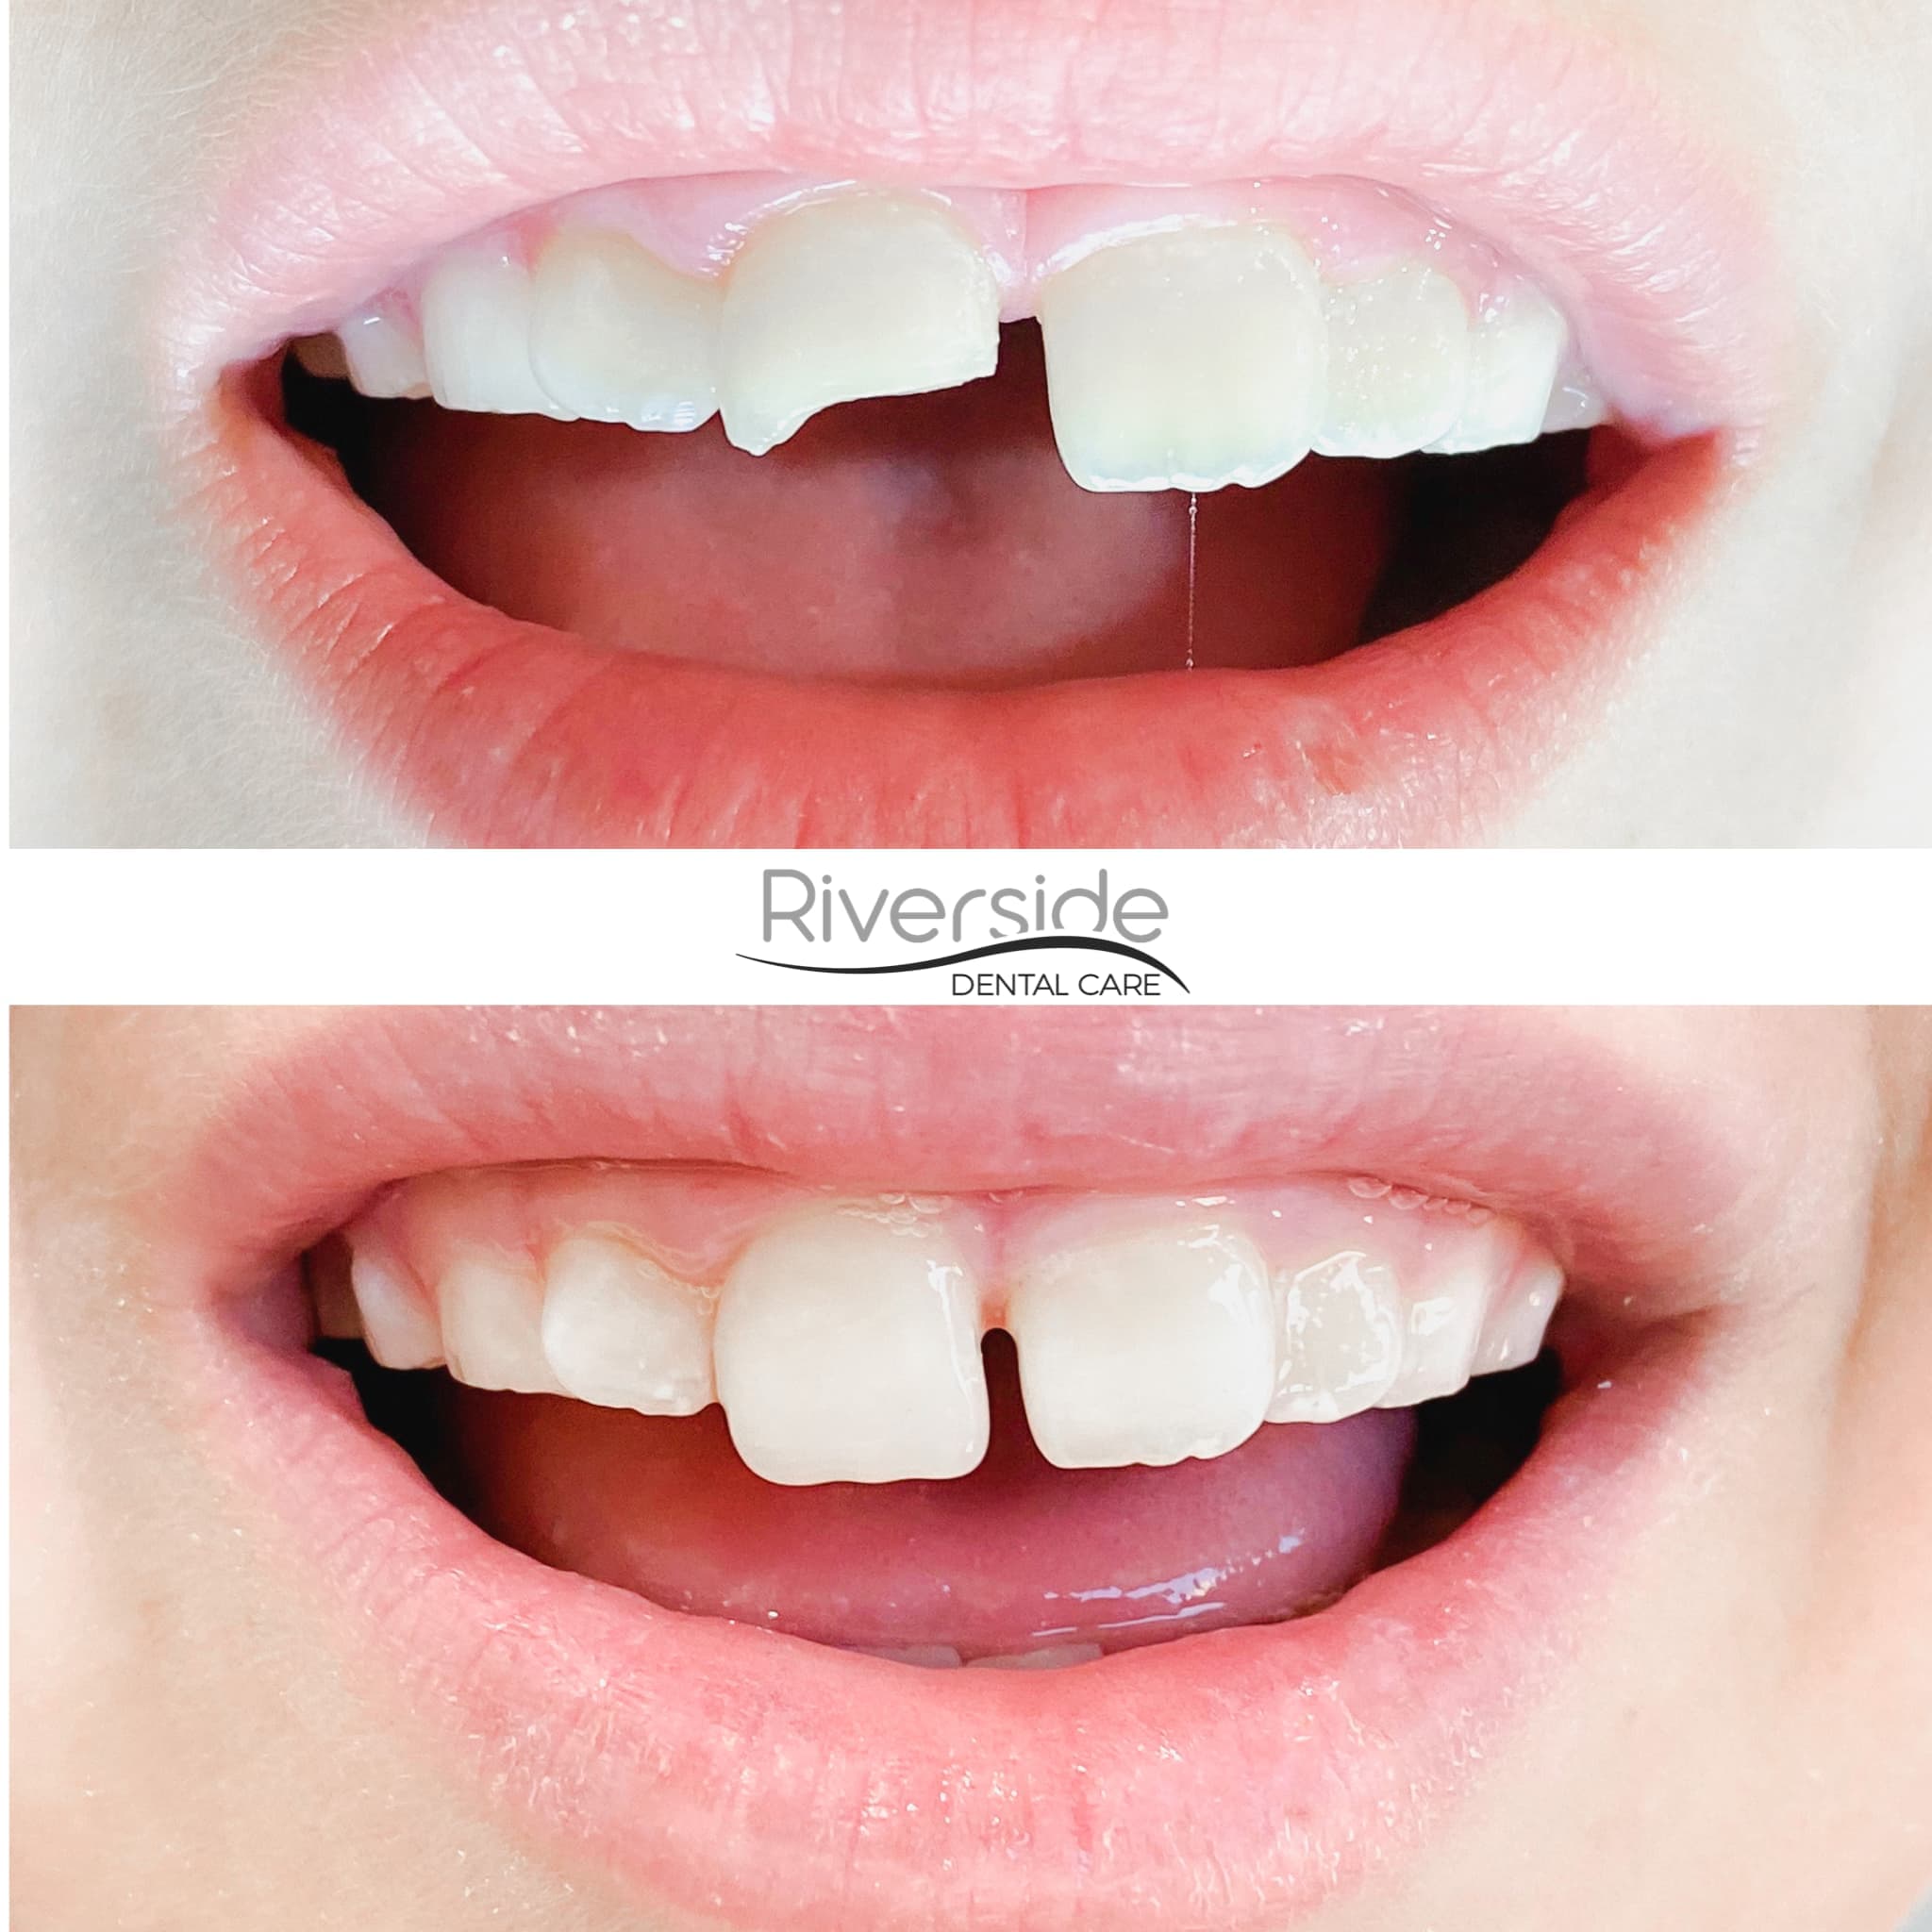 Riverside - Emergency Dental Before And After Picture